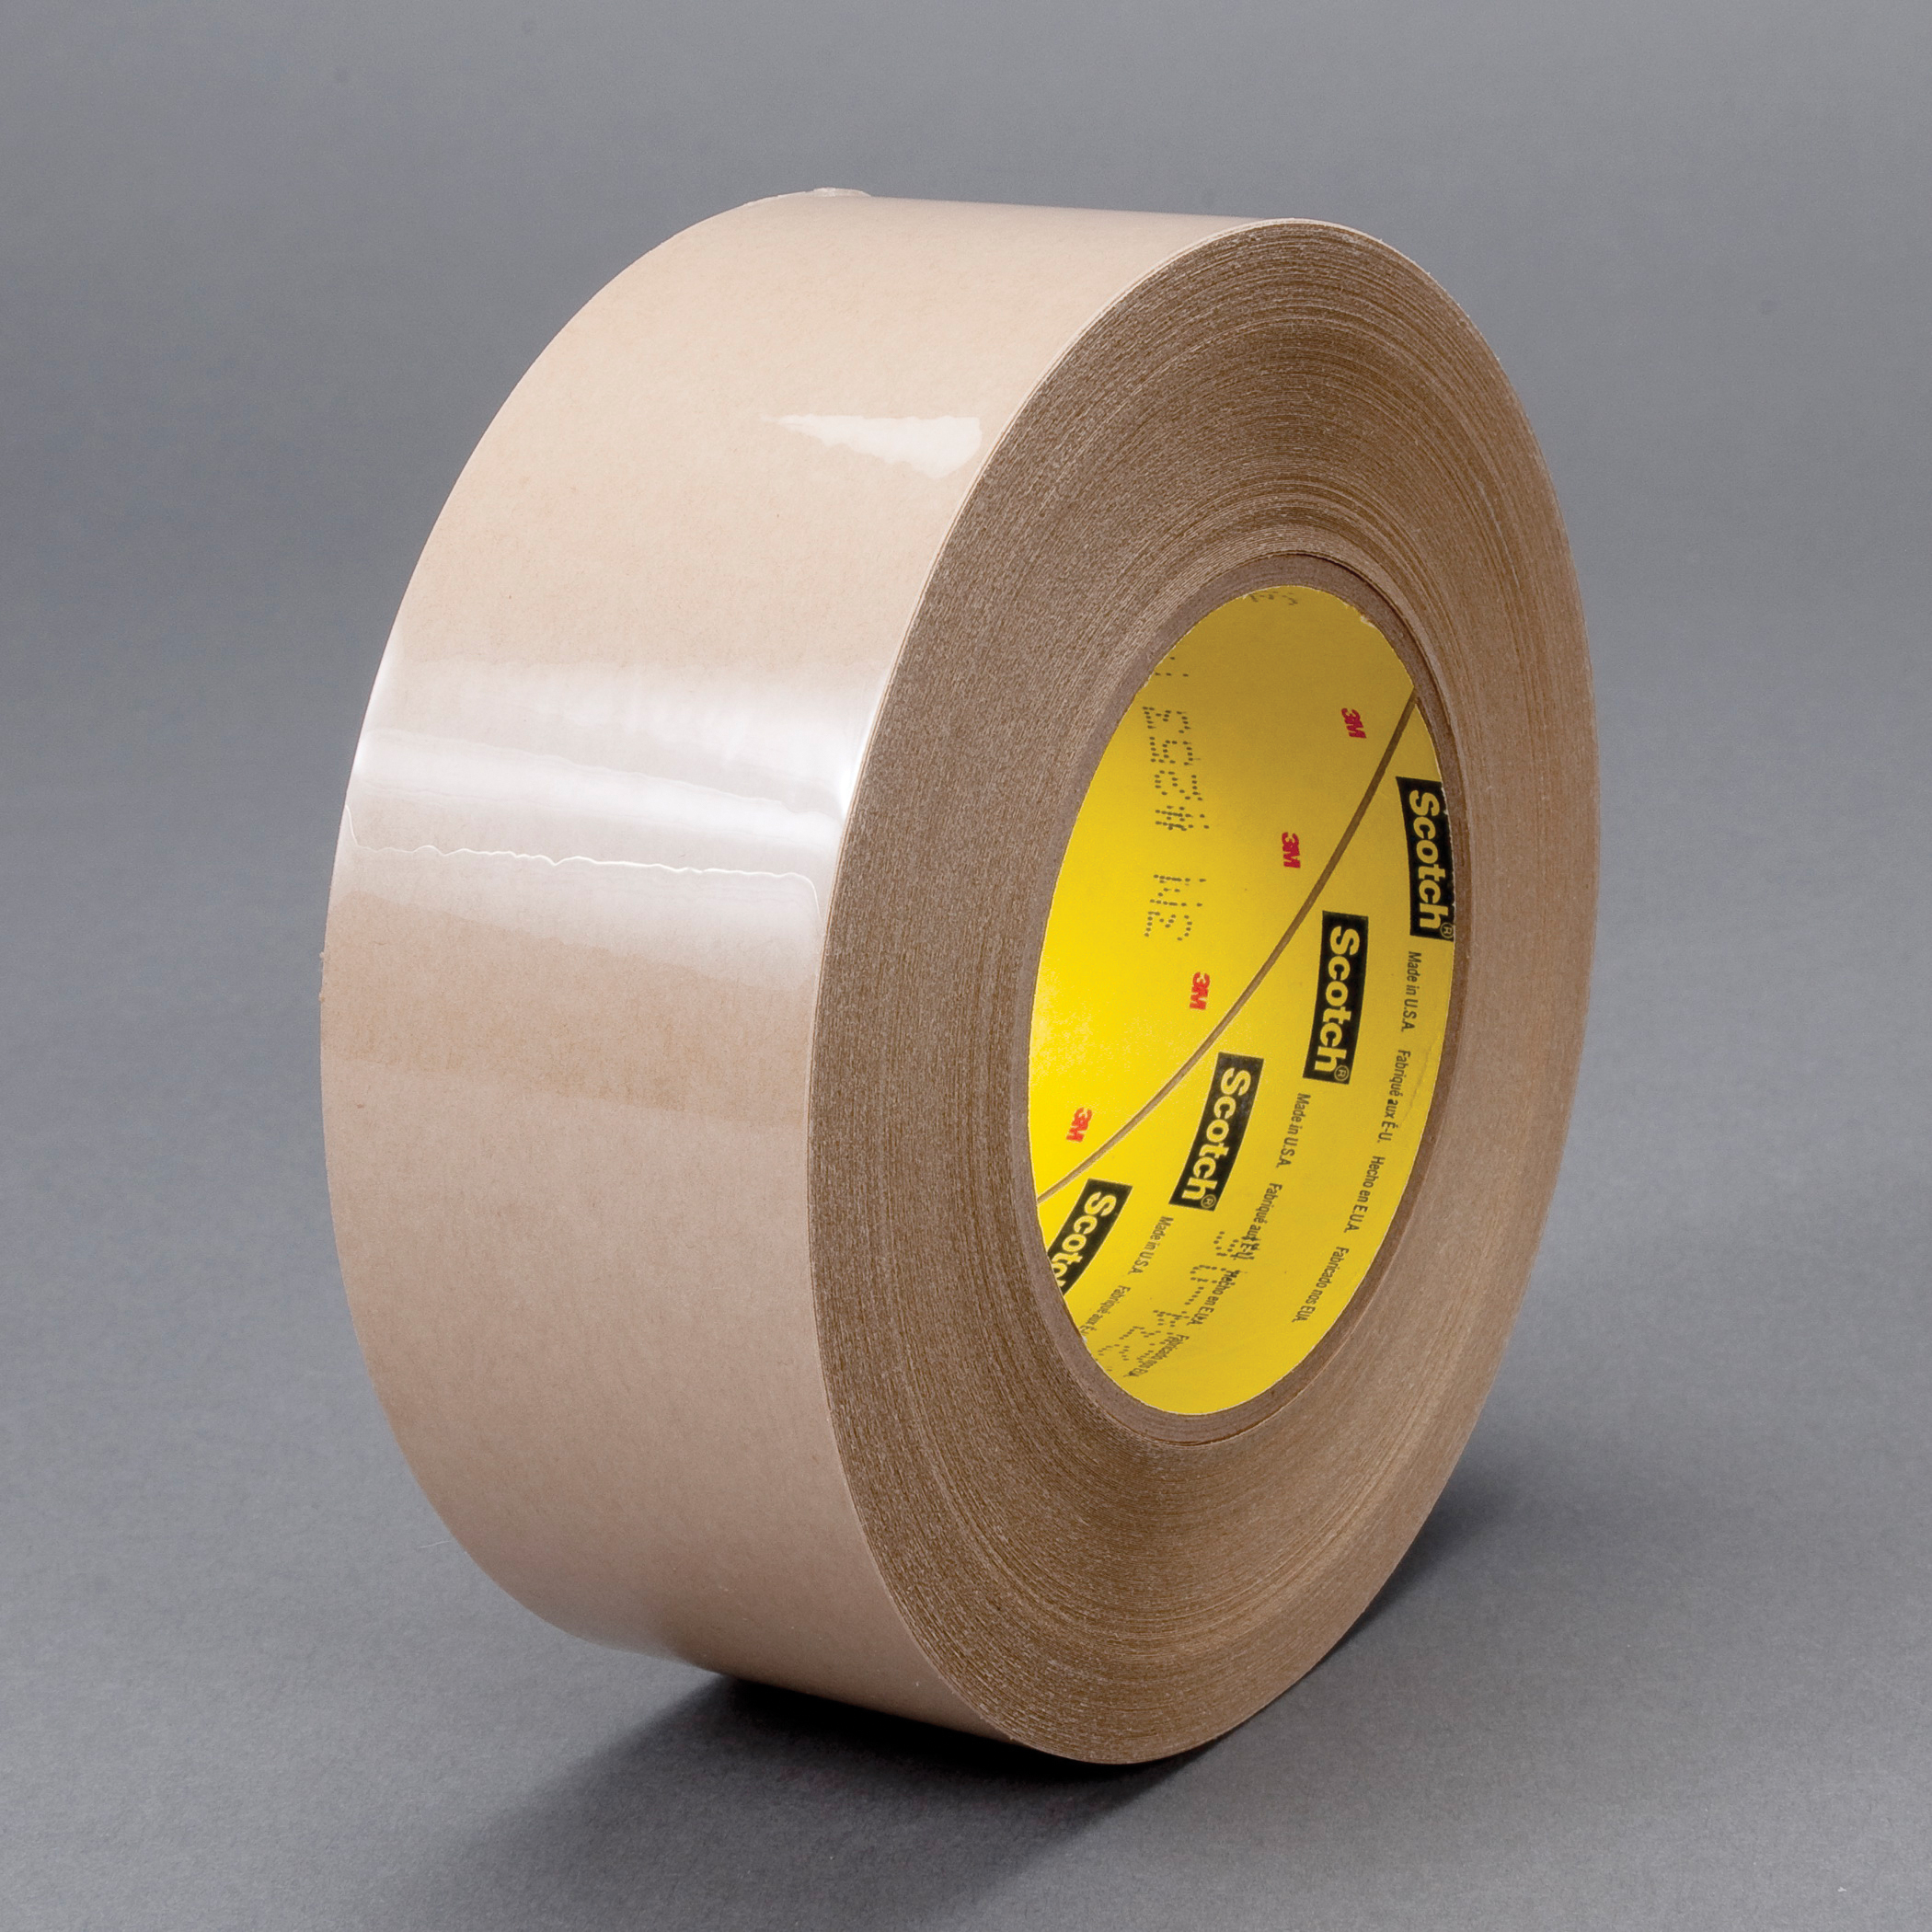 3M™ 021200-83874 Single Coated Splicing Tape, 60 yd L x 1 in W, 4.6 mil THK, Silicon Adhesive, Treated Flatstock Paper Backing, Tan